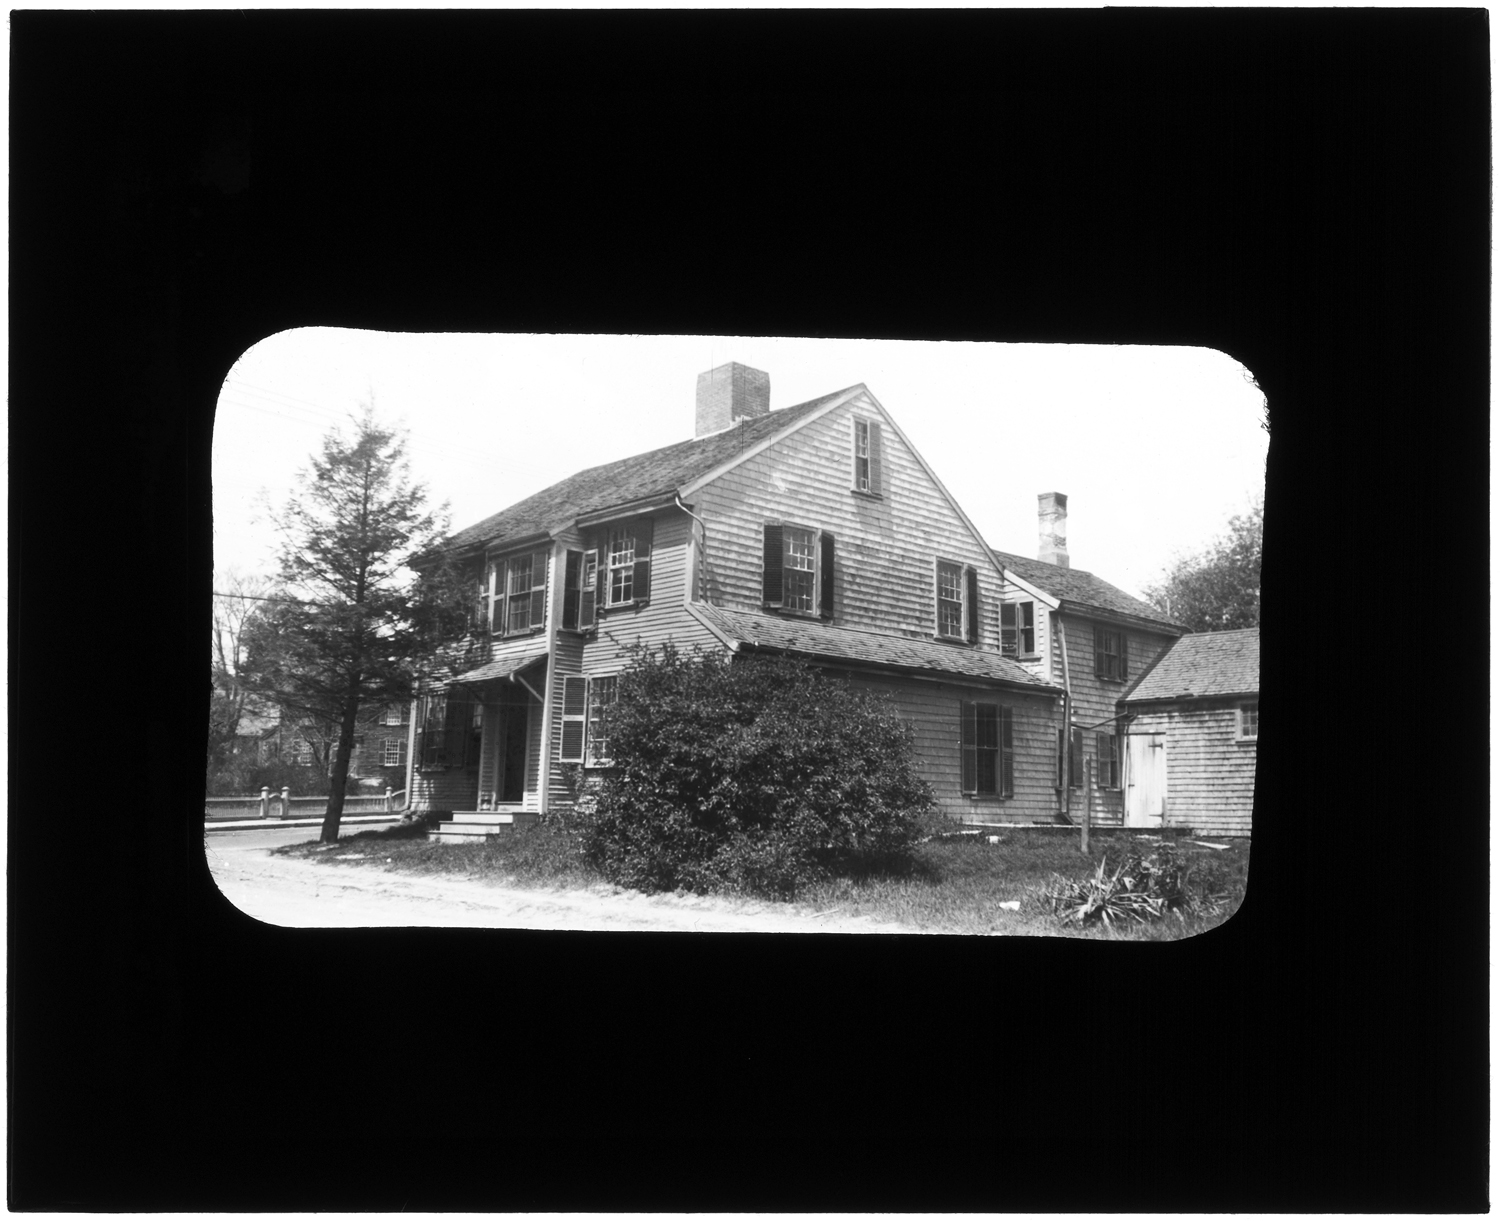 135. John Brewster house, Main and Linden Streets, 1922